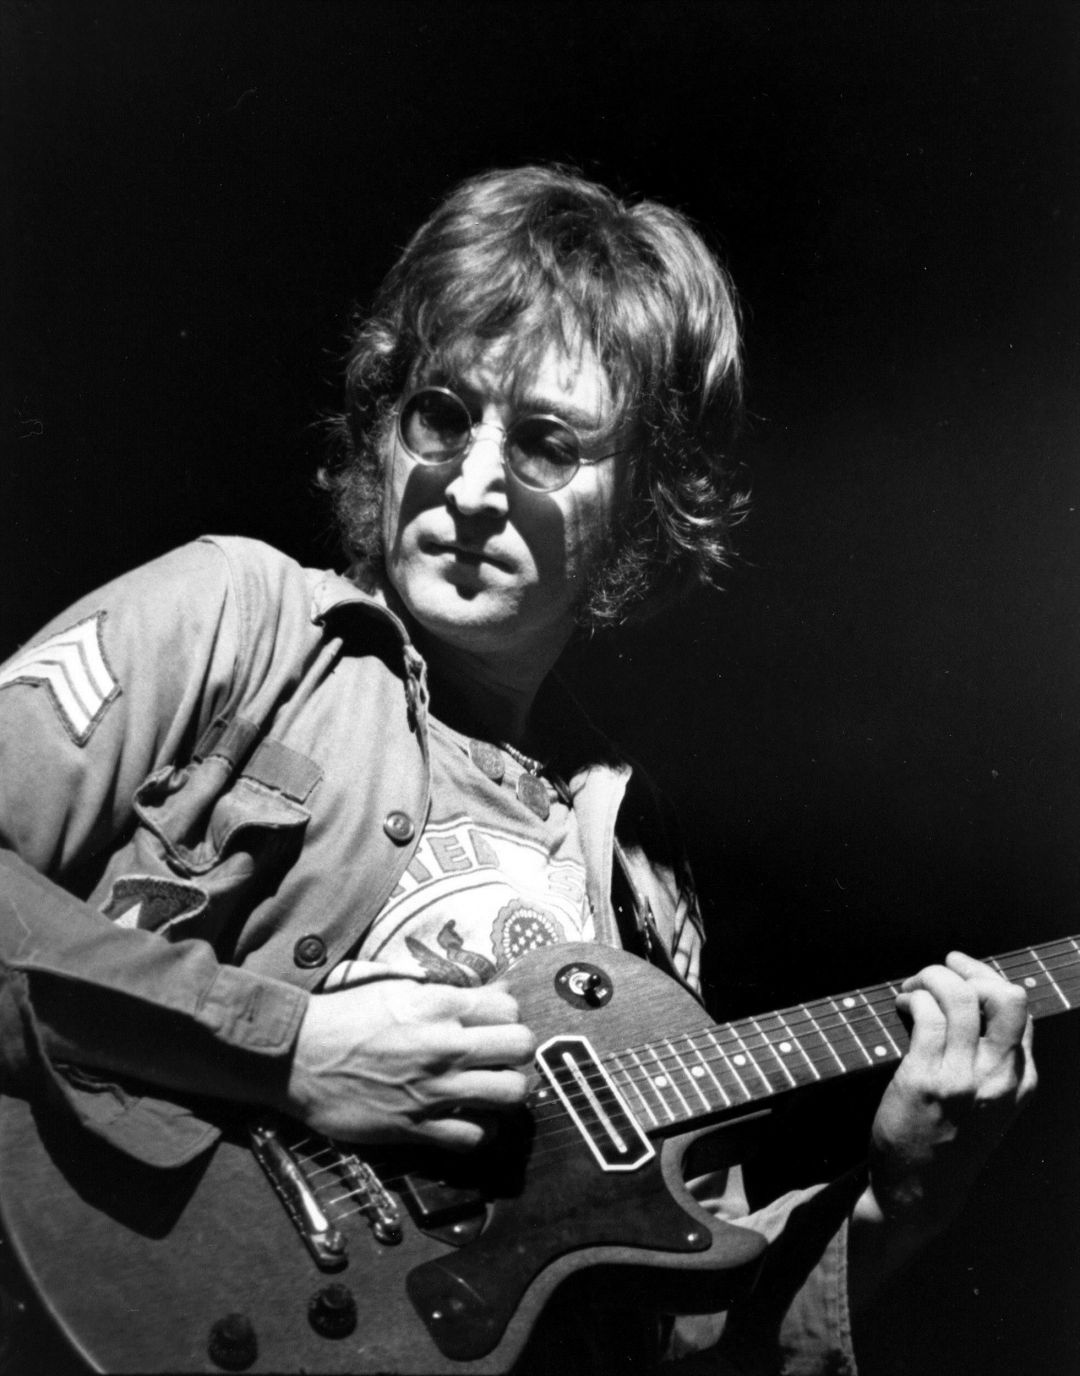 Android, Iphone, Desktop Hd Backgrounds / Wallpapers - John Lennon With Guitar - HD Wallpaper 